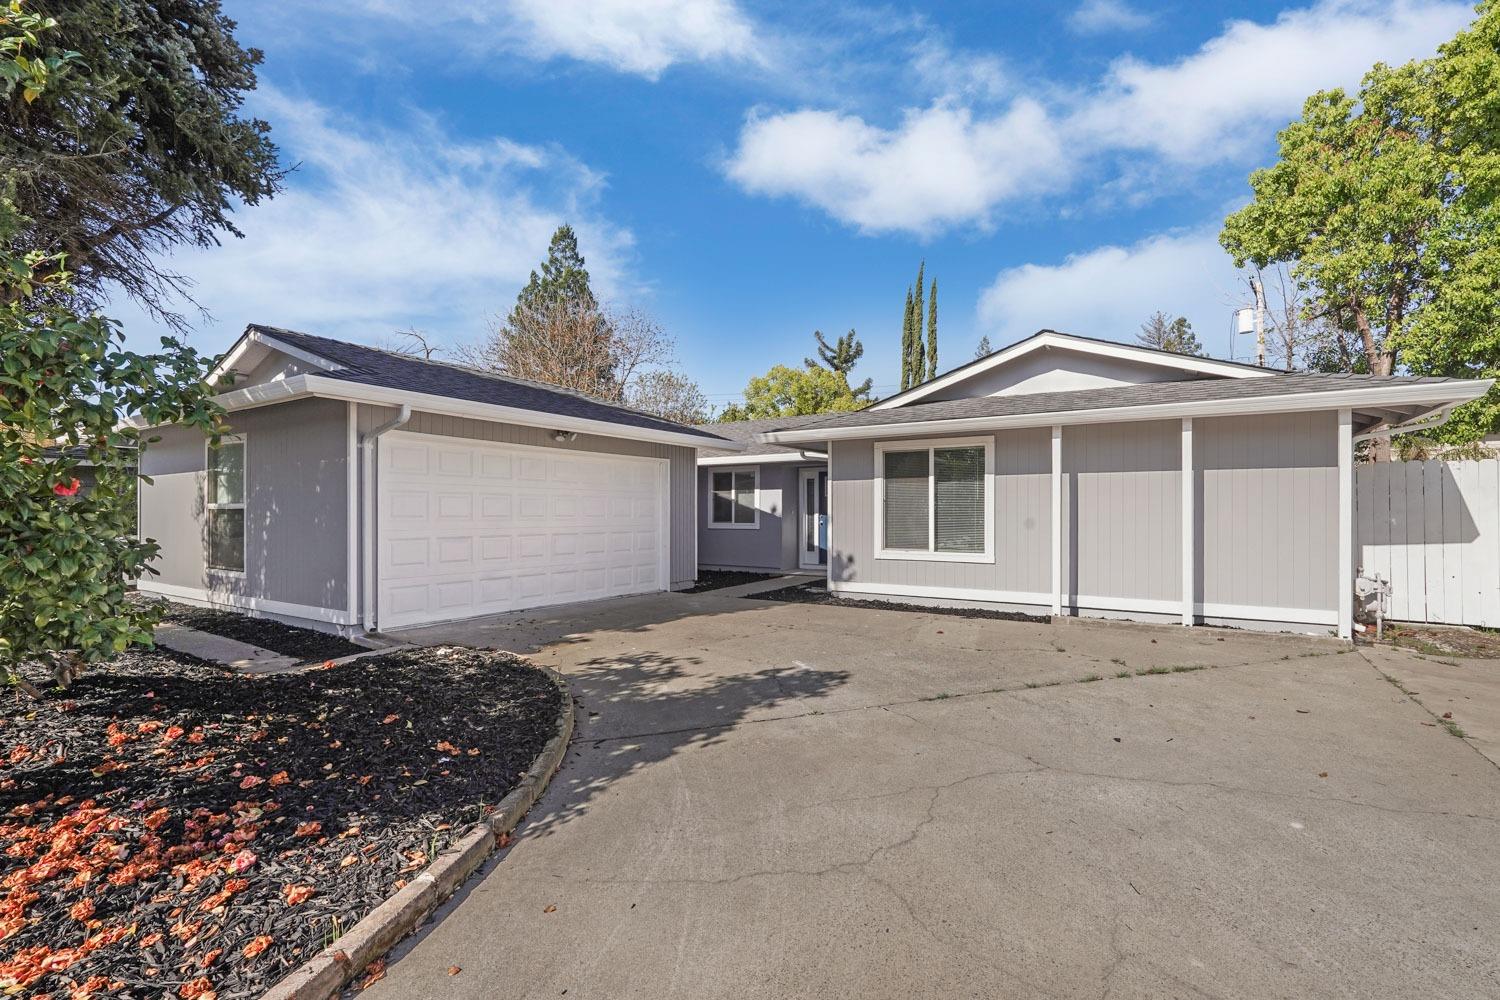 Photo of 2508 Clearlake Wy in Sacramento, CA